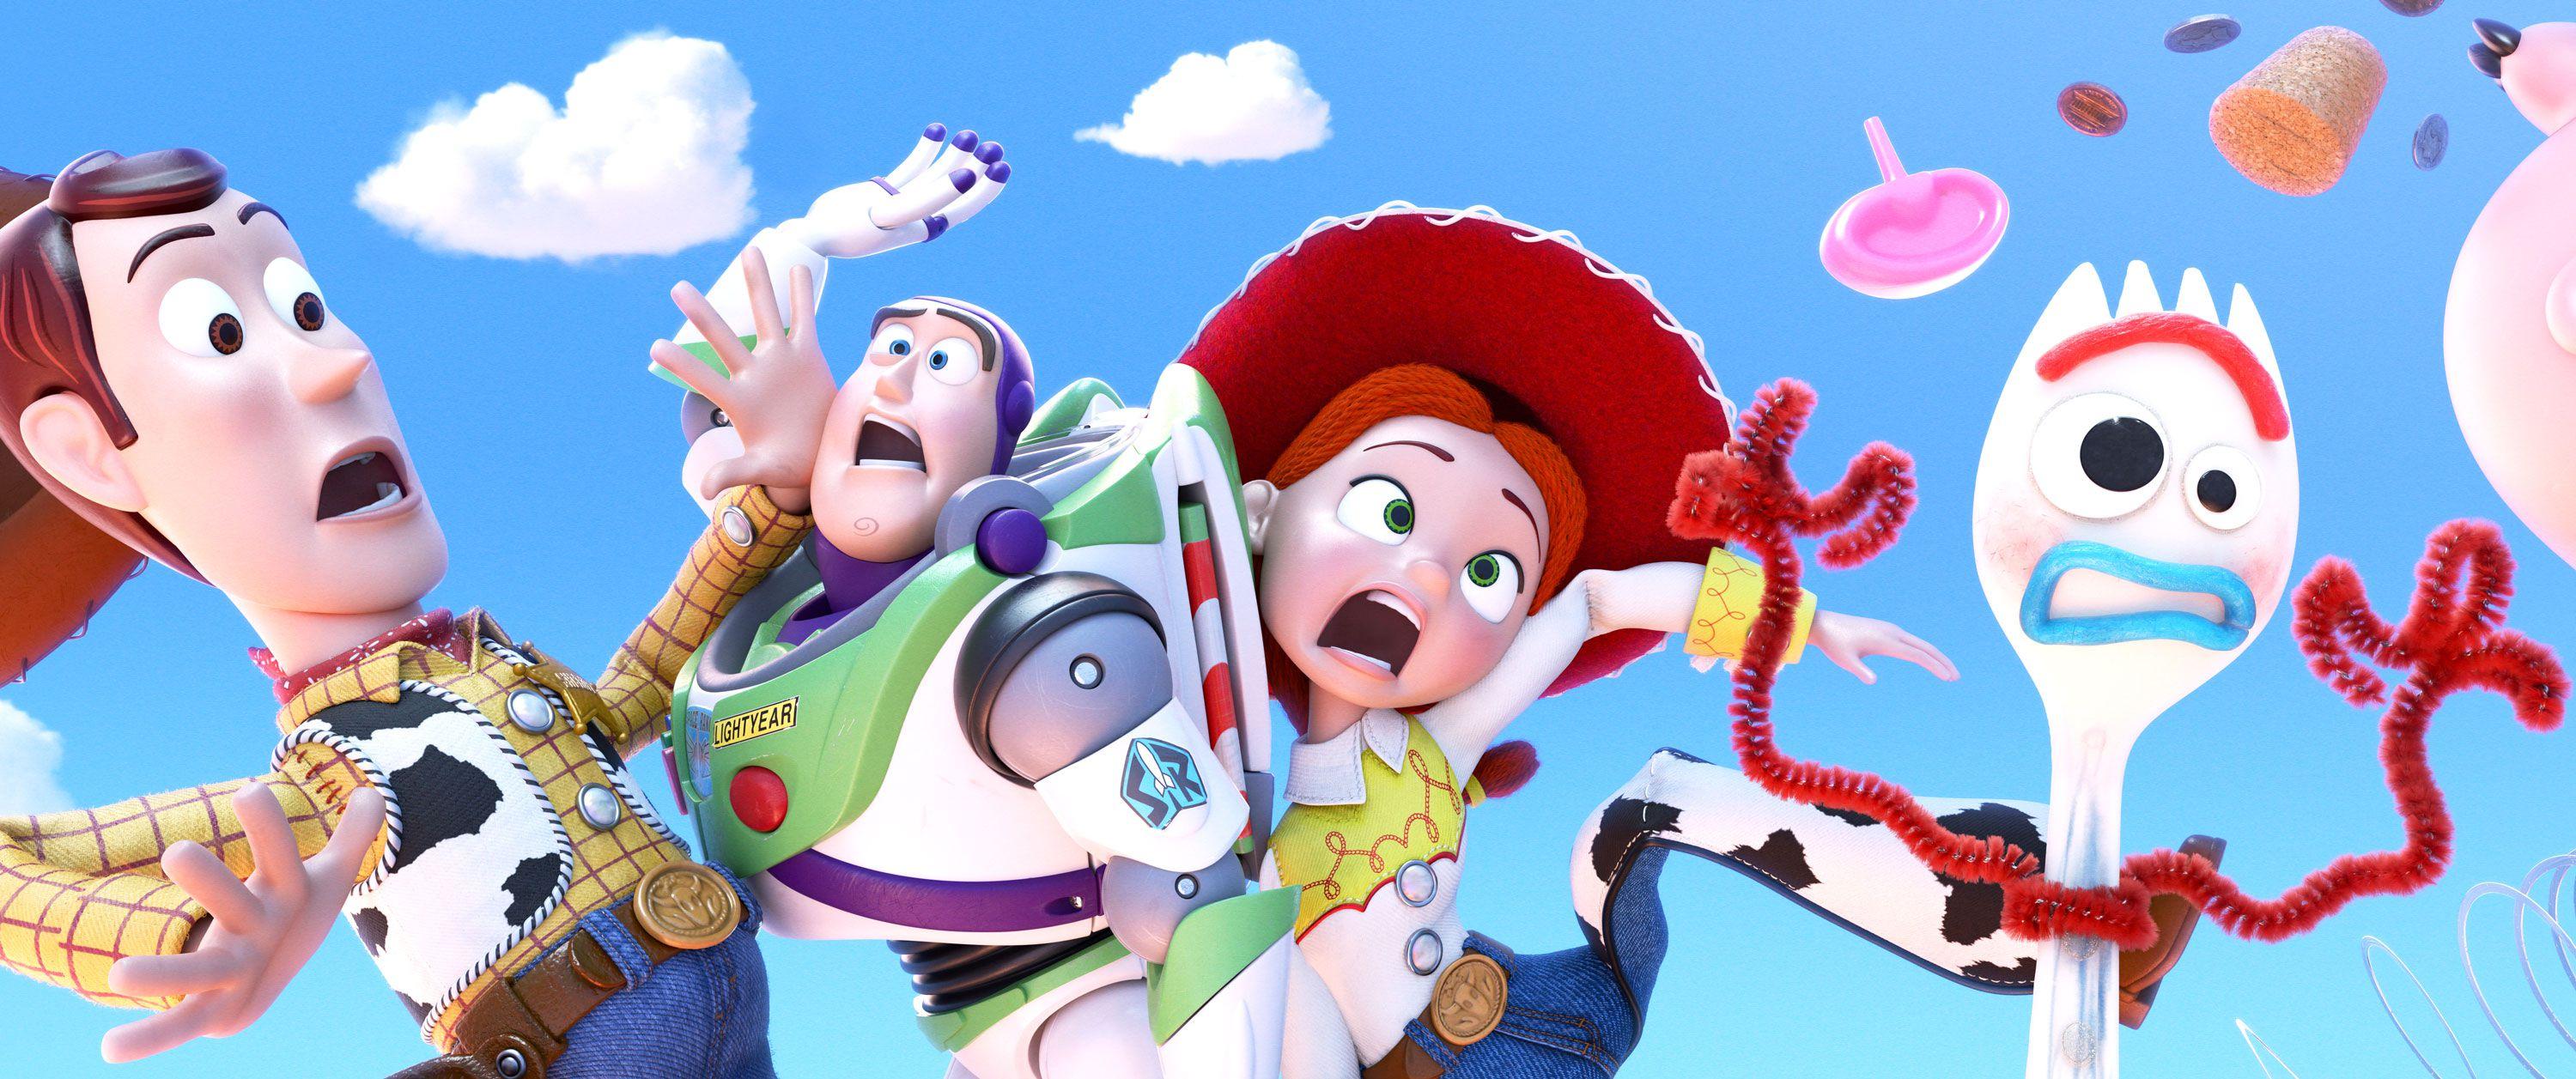 Toy Story 4 trailer, release date, plot, cast